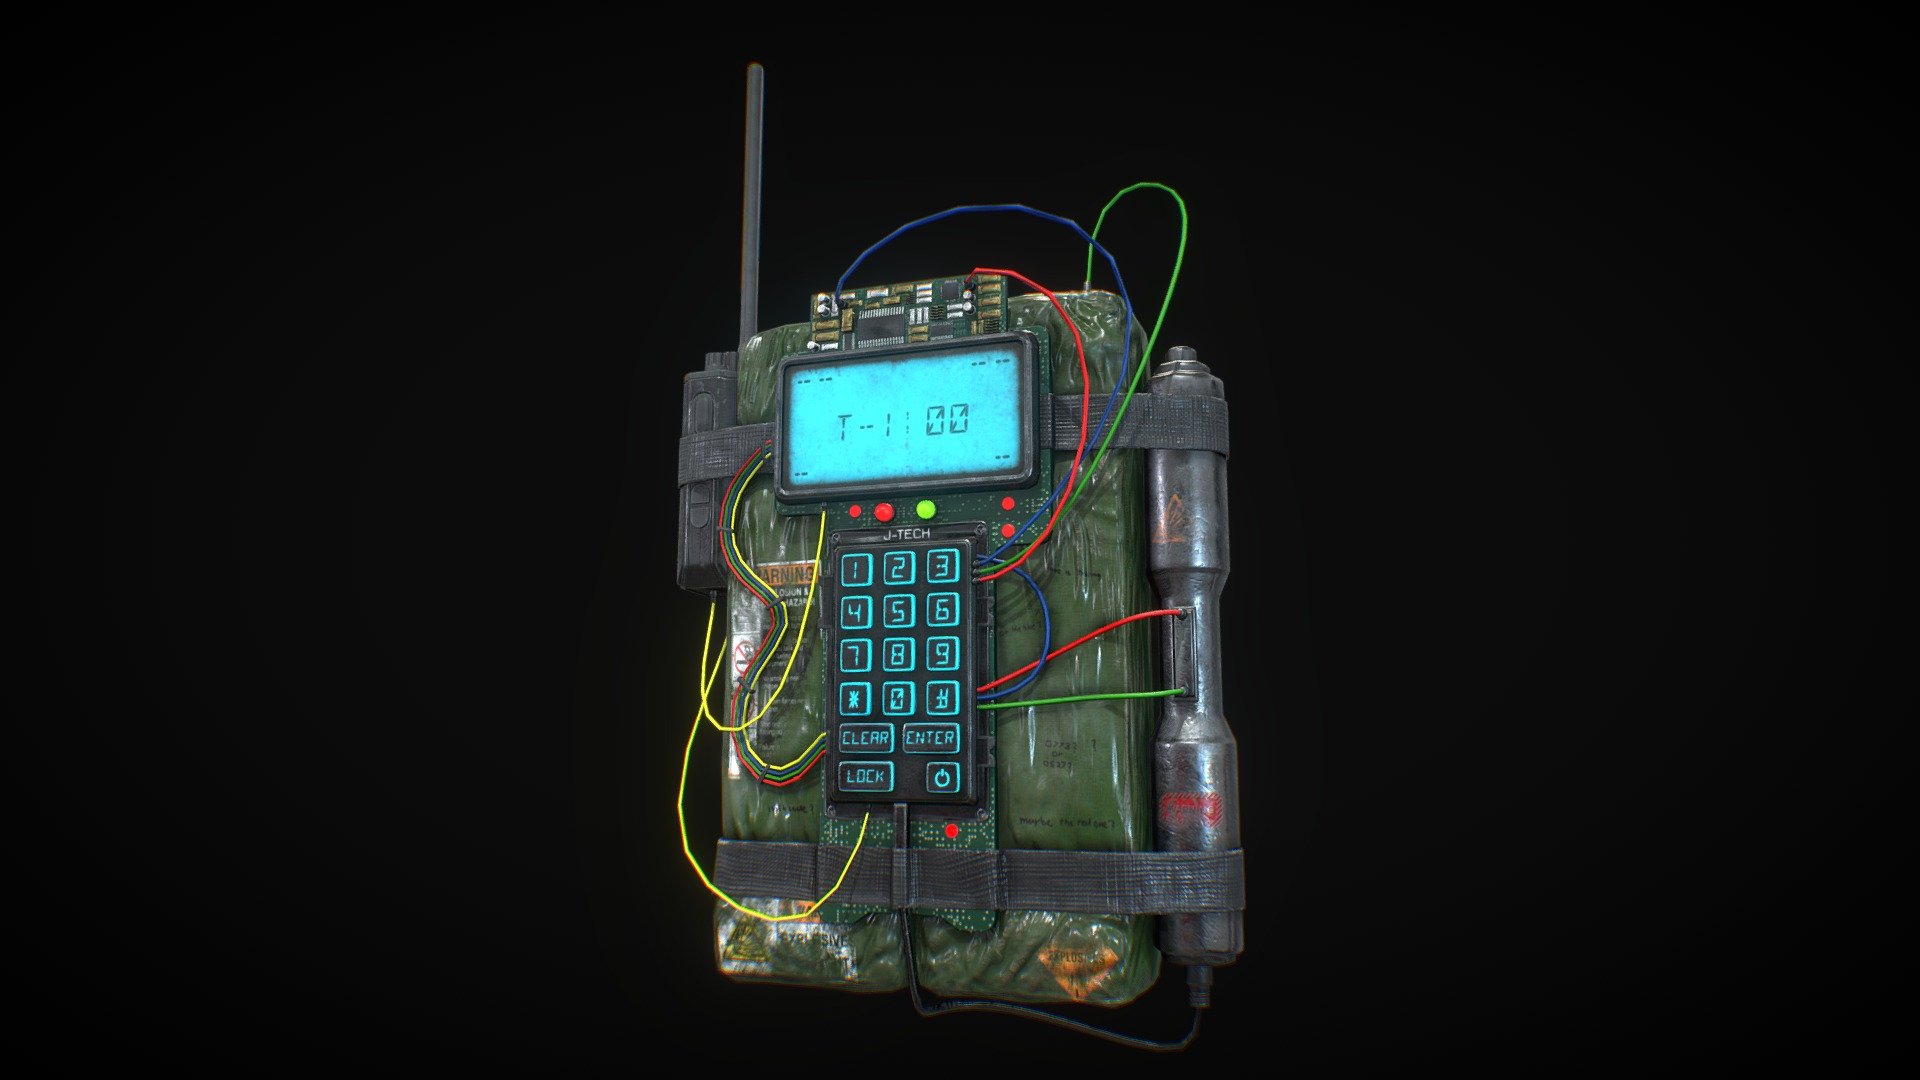 C4 Plastic Explosive Bomb

Model Information:




Made in Blender 3.6

Textured in Substance Painter

Additional Support. Formats: (.STL .OBJ .DAE .FBX)

Optimized

Textures (PNG/JPG):




Albedo: (4096x4096)

Normal: (4096x4096)

AO: (4096x4096)

(PBR) Metallic: (4096x4096)

Roughness: (4096x4096)

Emissive map: (4096x4096)

MODEL SHOWCASE:




Others:

You can also check out my newly released Survival Horror Starter Pack with 16 unique models on my profile.

Where to follow my art?
Instagram
Artstation

I will be happy for a review or comment - C4 Plastic Explosive - Buy Royalty Free 3D model by Jakub (@jakub.iv) 3d model